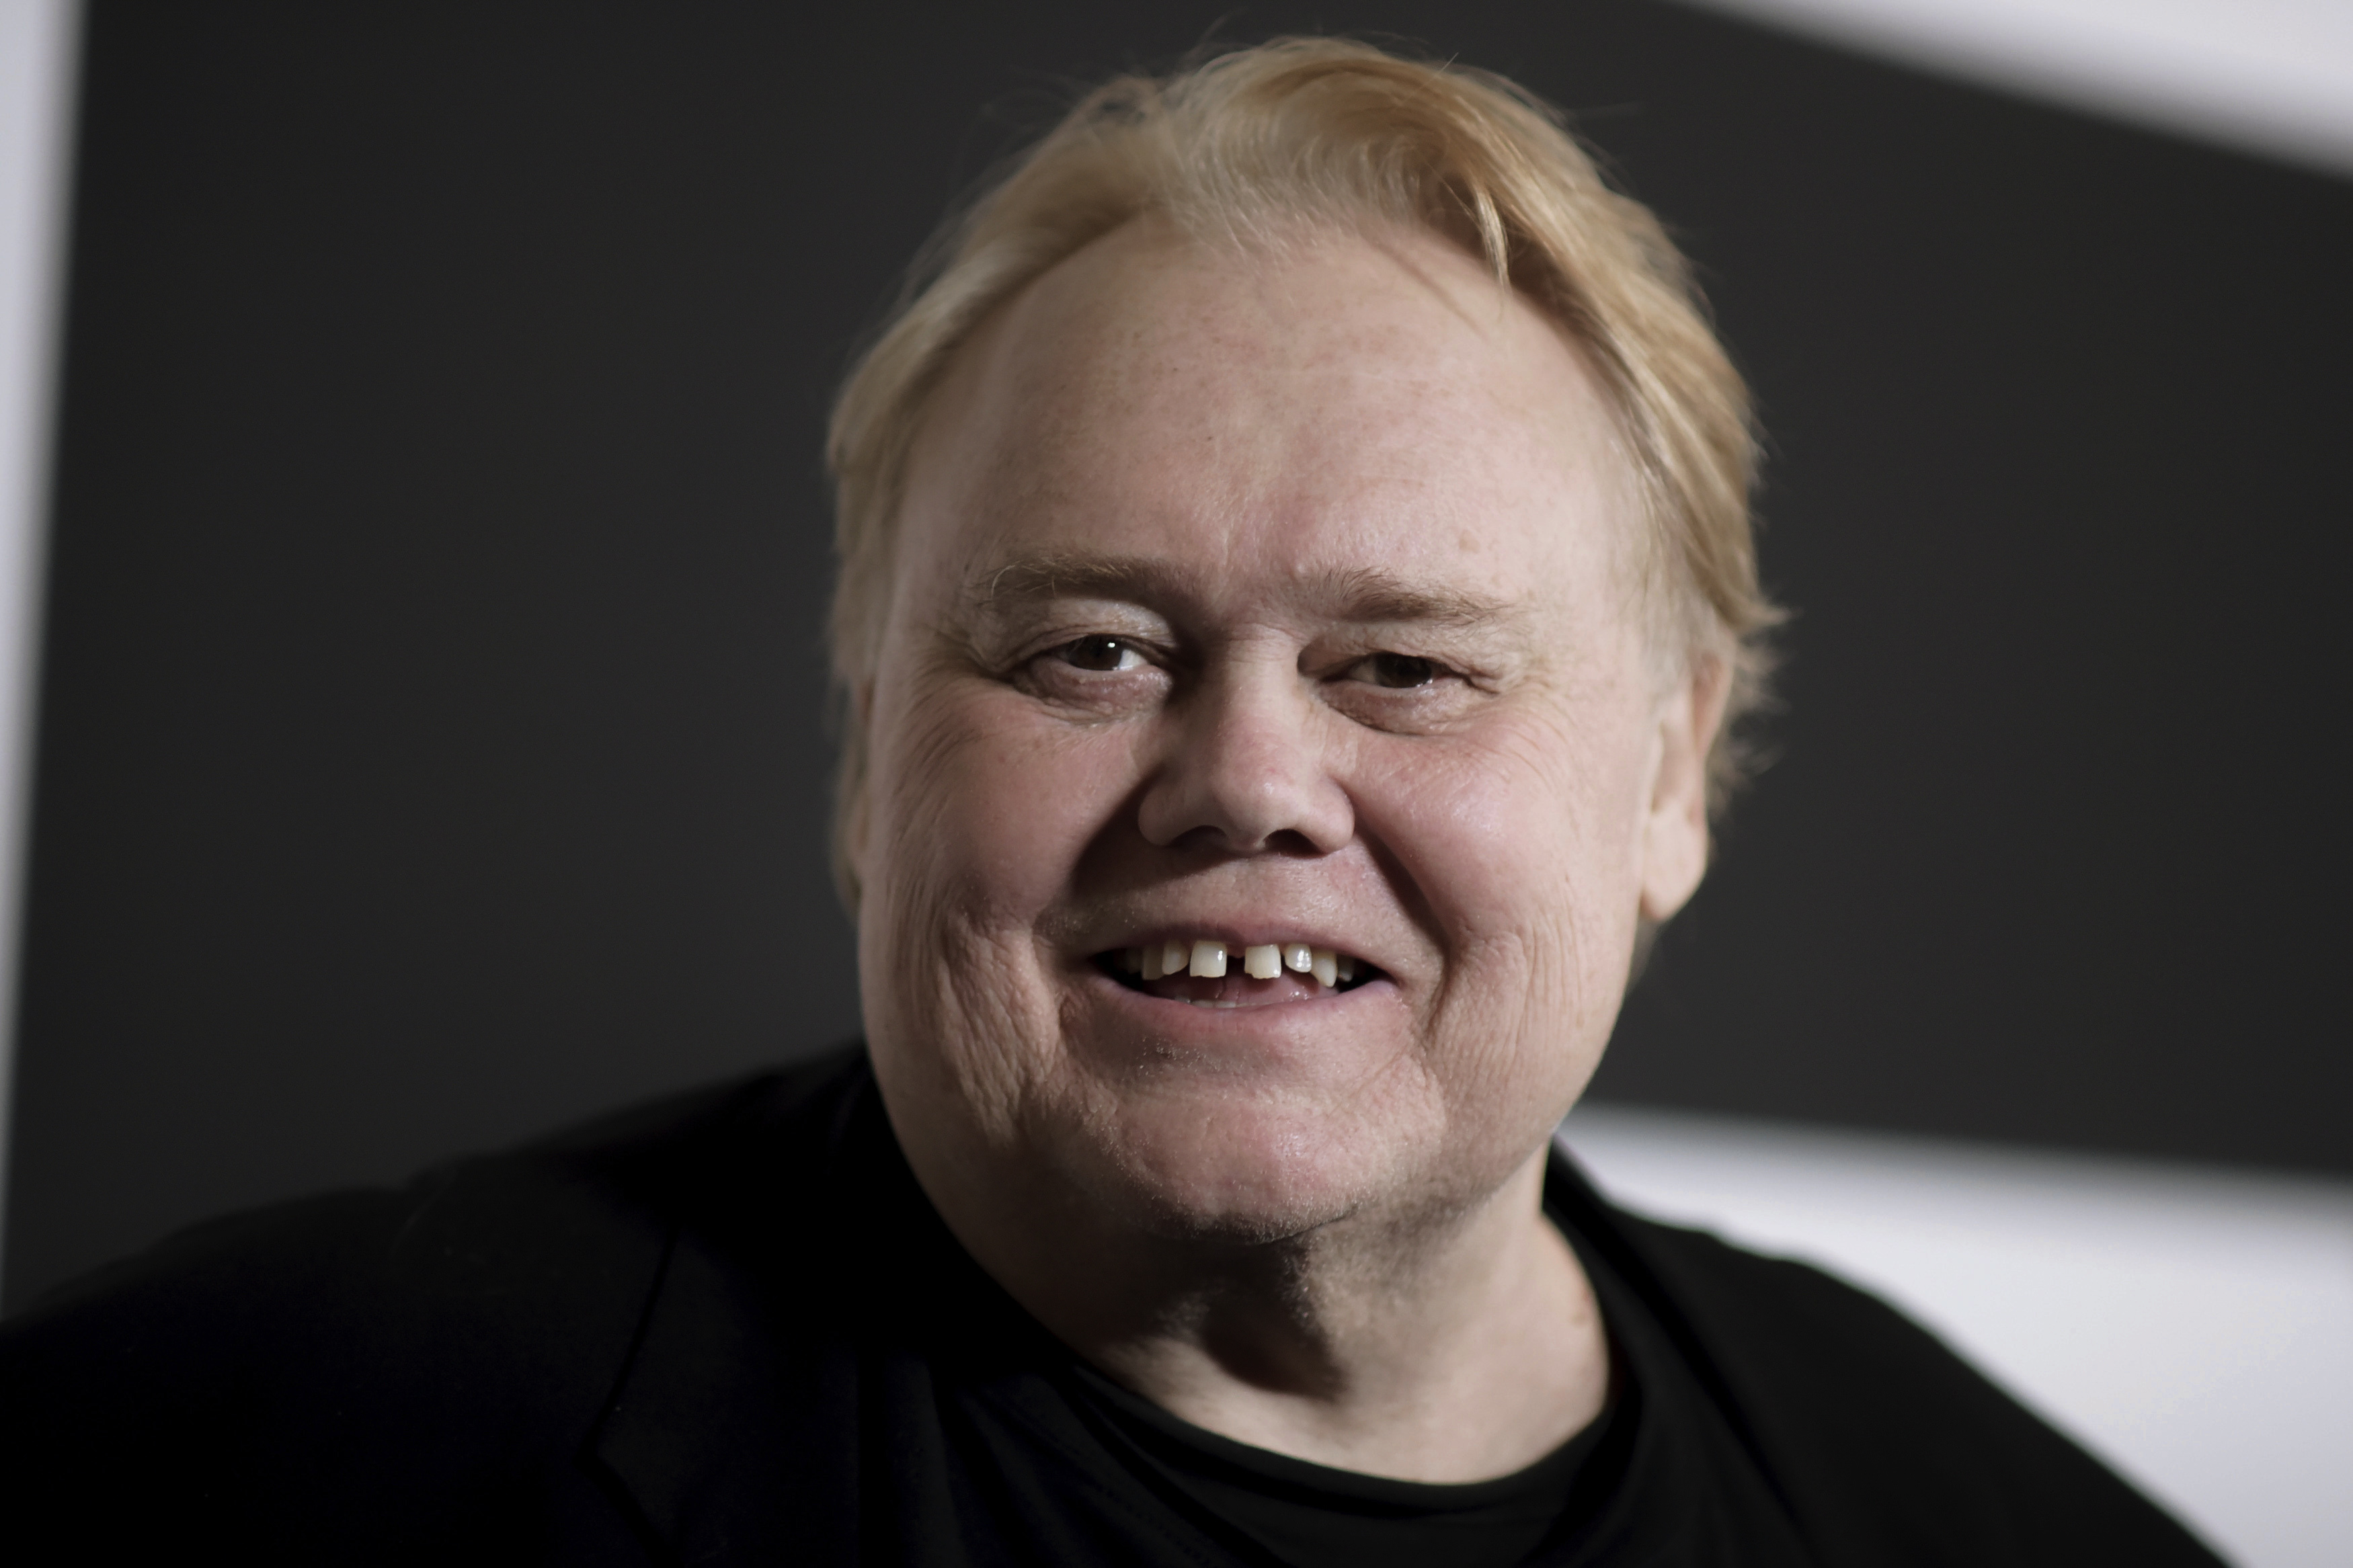 Louie Anderson attends the "Starwalk" at the FX portion of the 2017 Winter Television Critics Association press tour  on Thursday, Jan. 12, 2017, in Pasadena, Calif. 